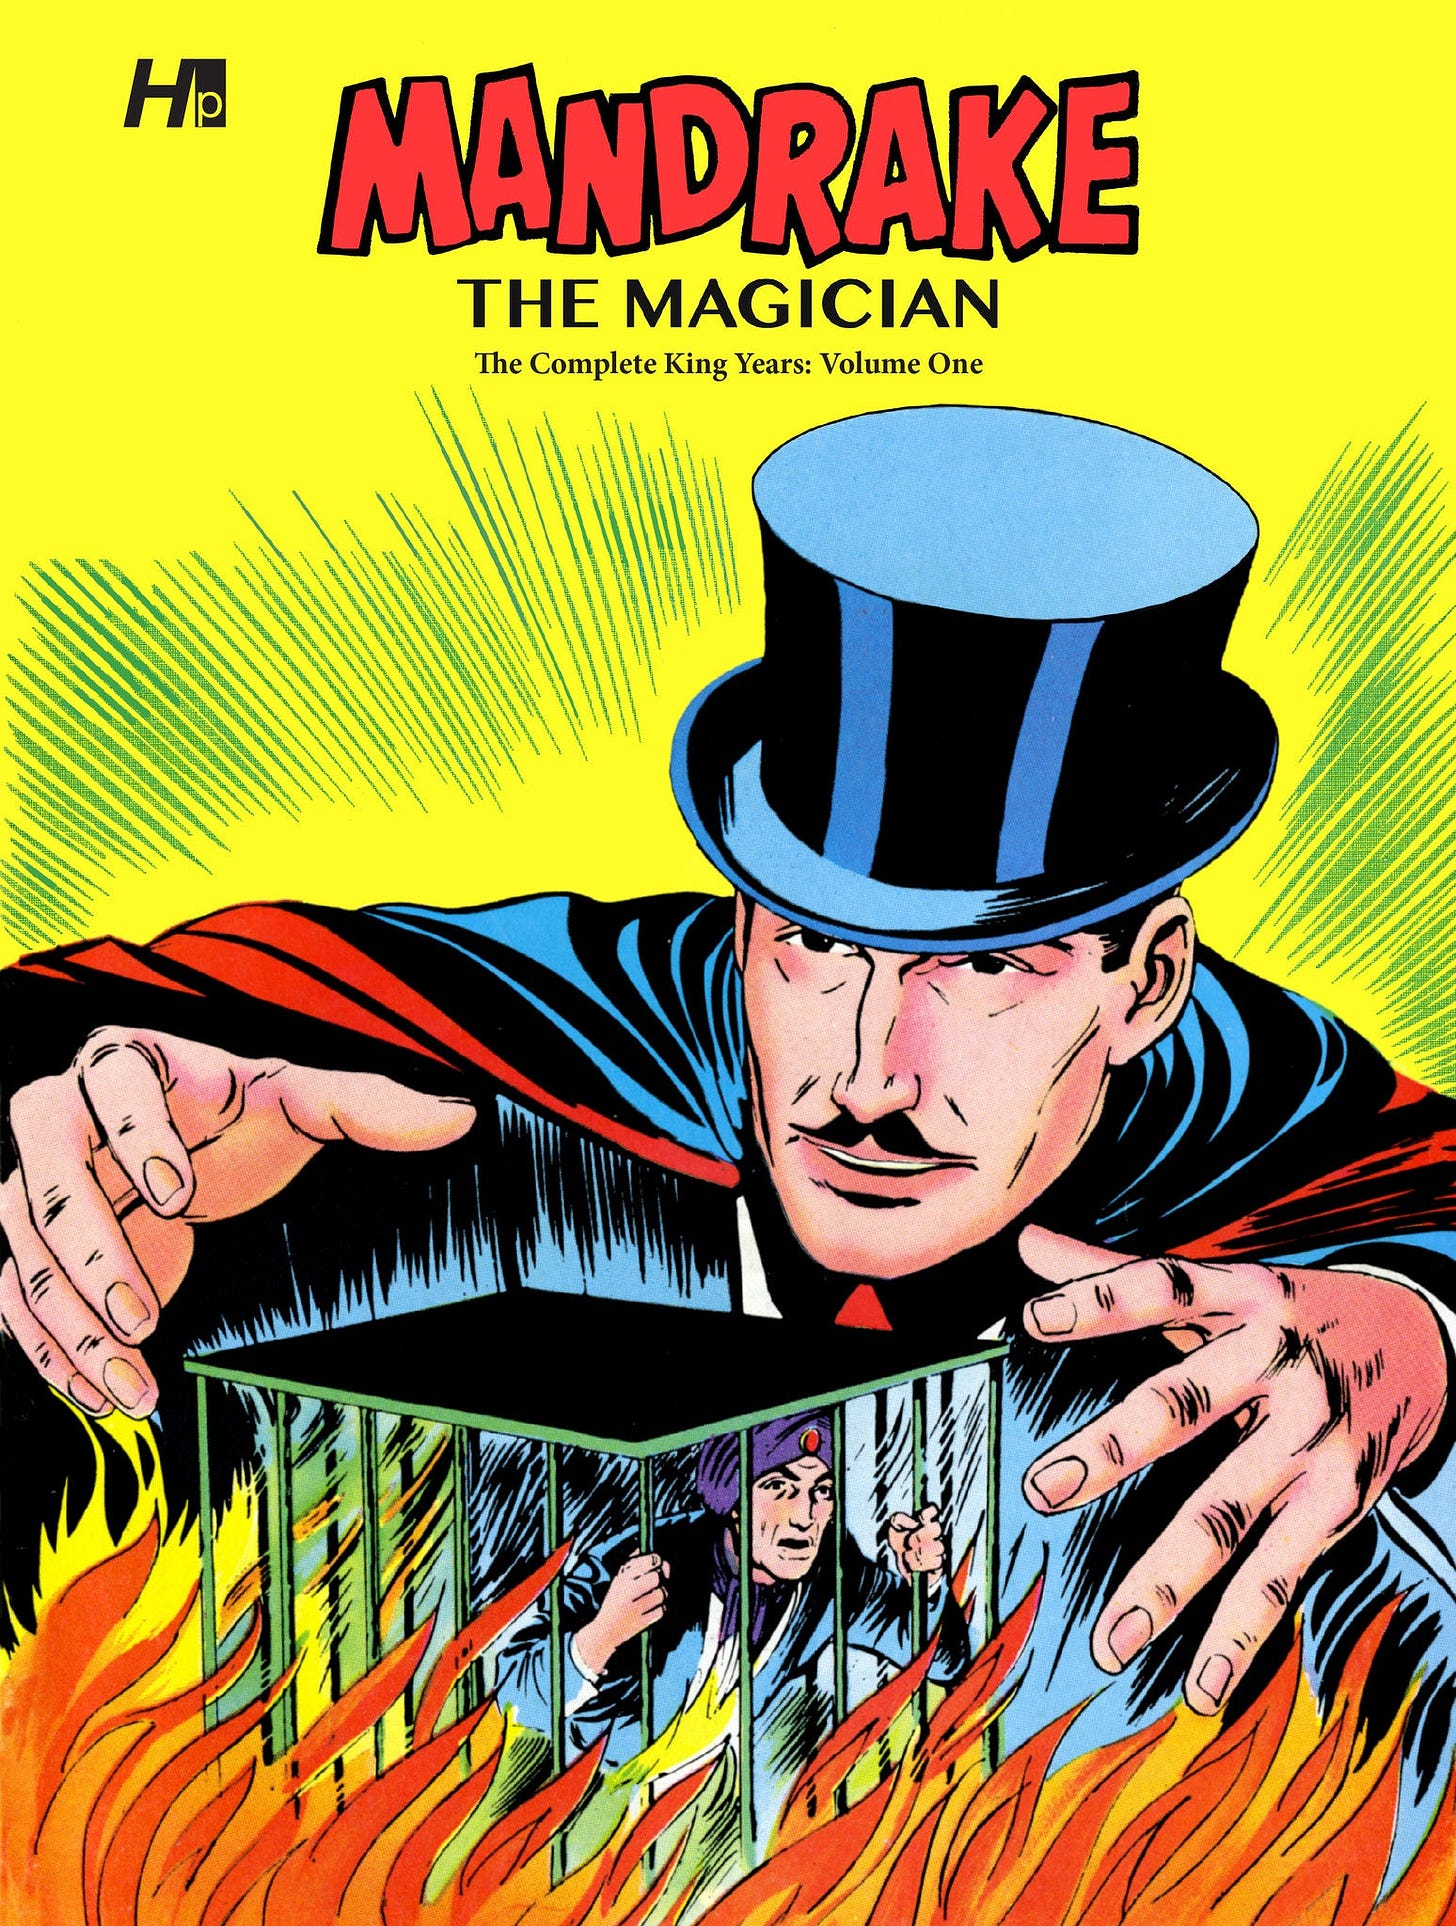 Mandrake the Magician: The Complete King Years Volume 1 - Hermes Press